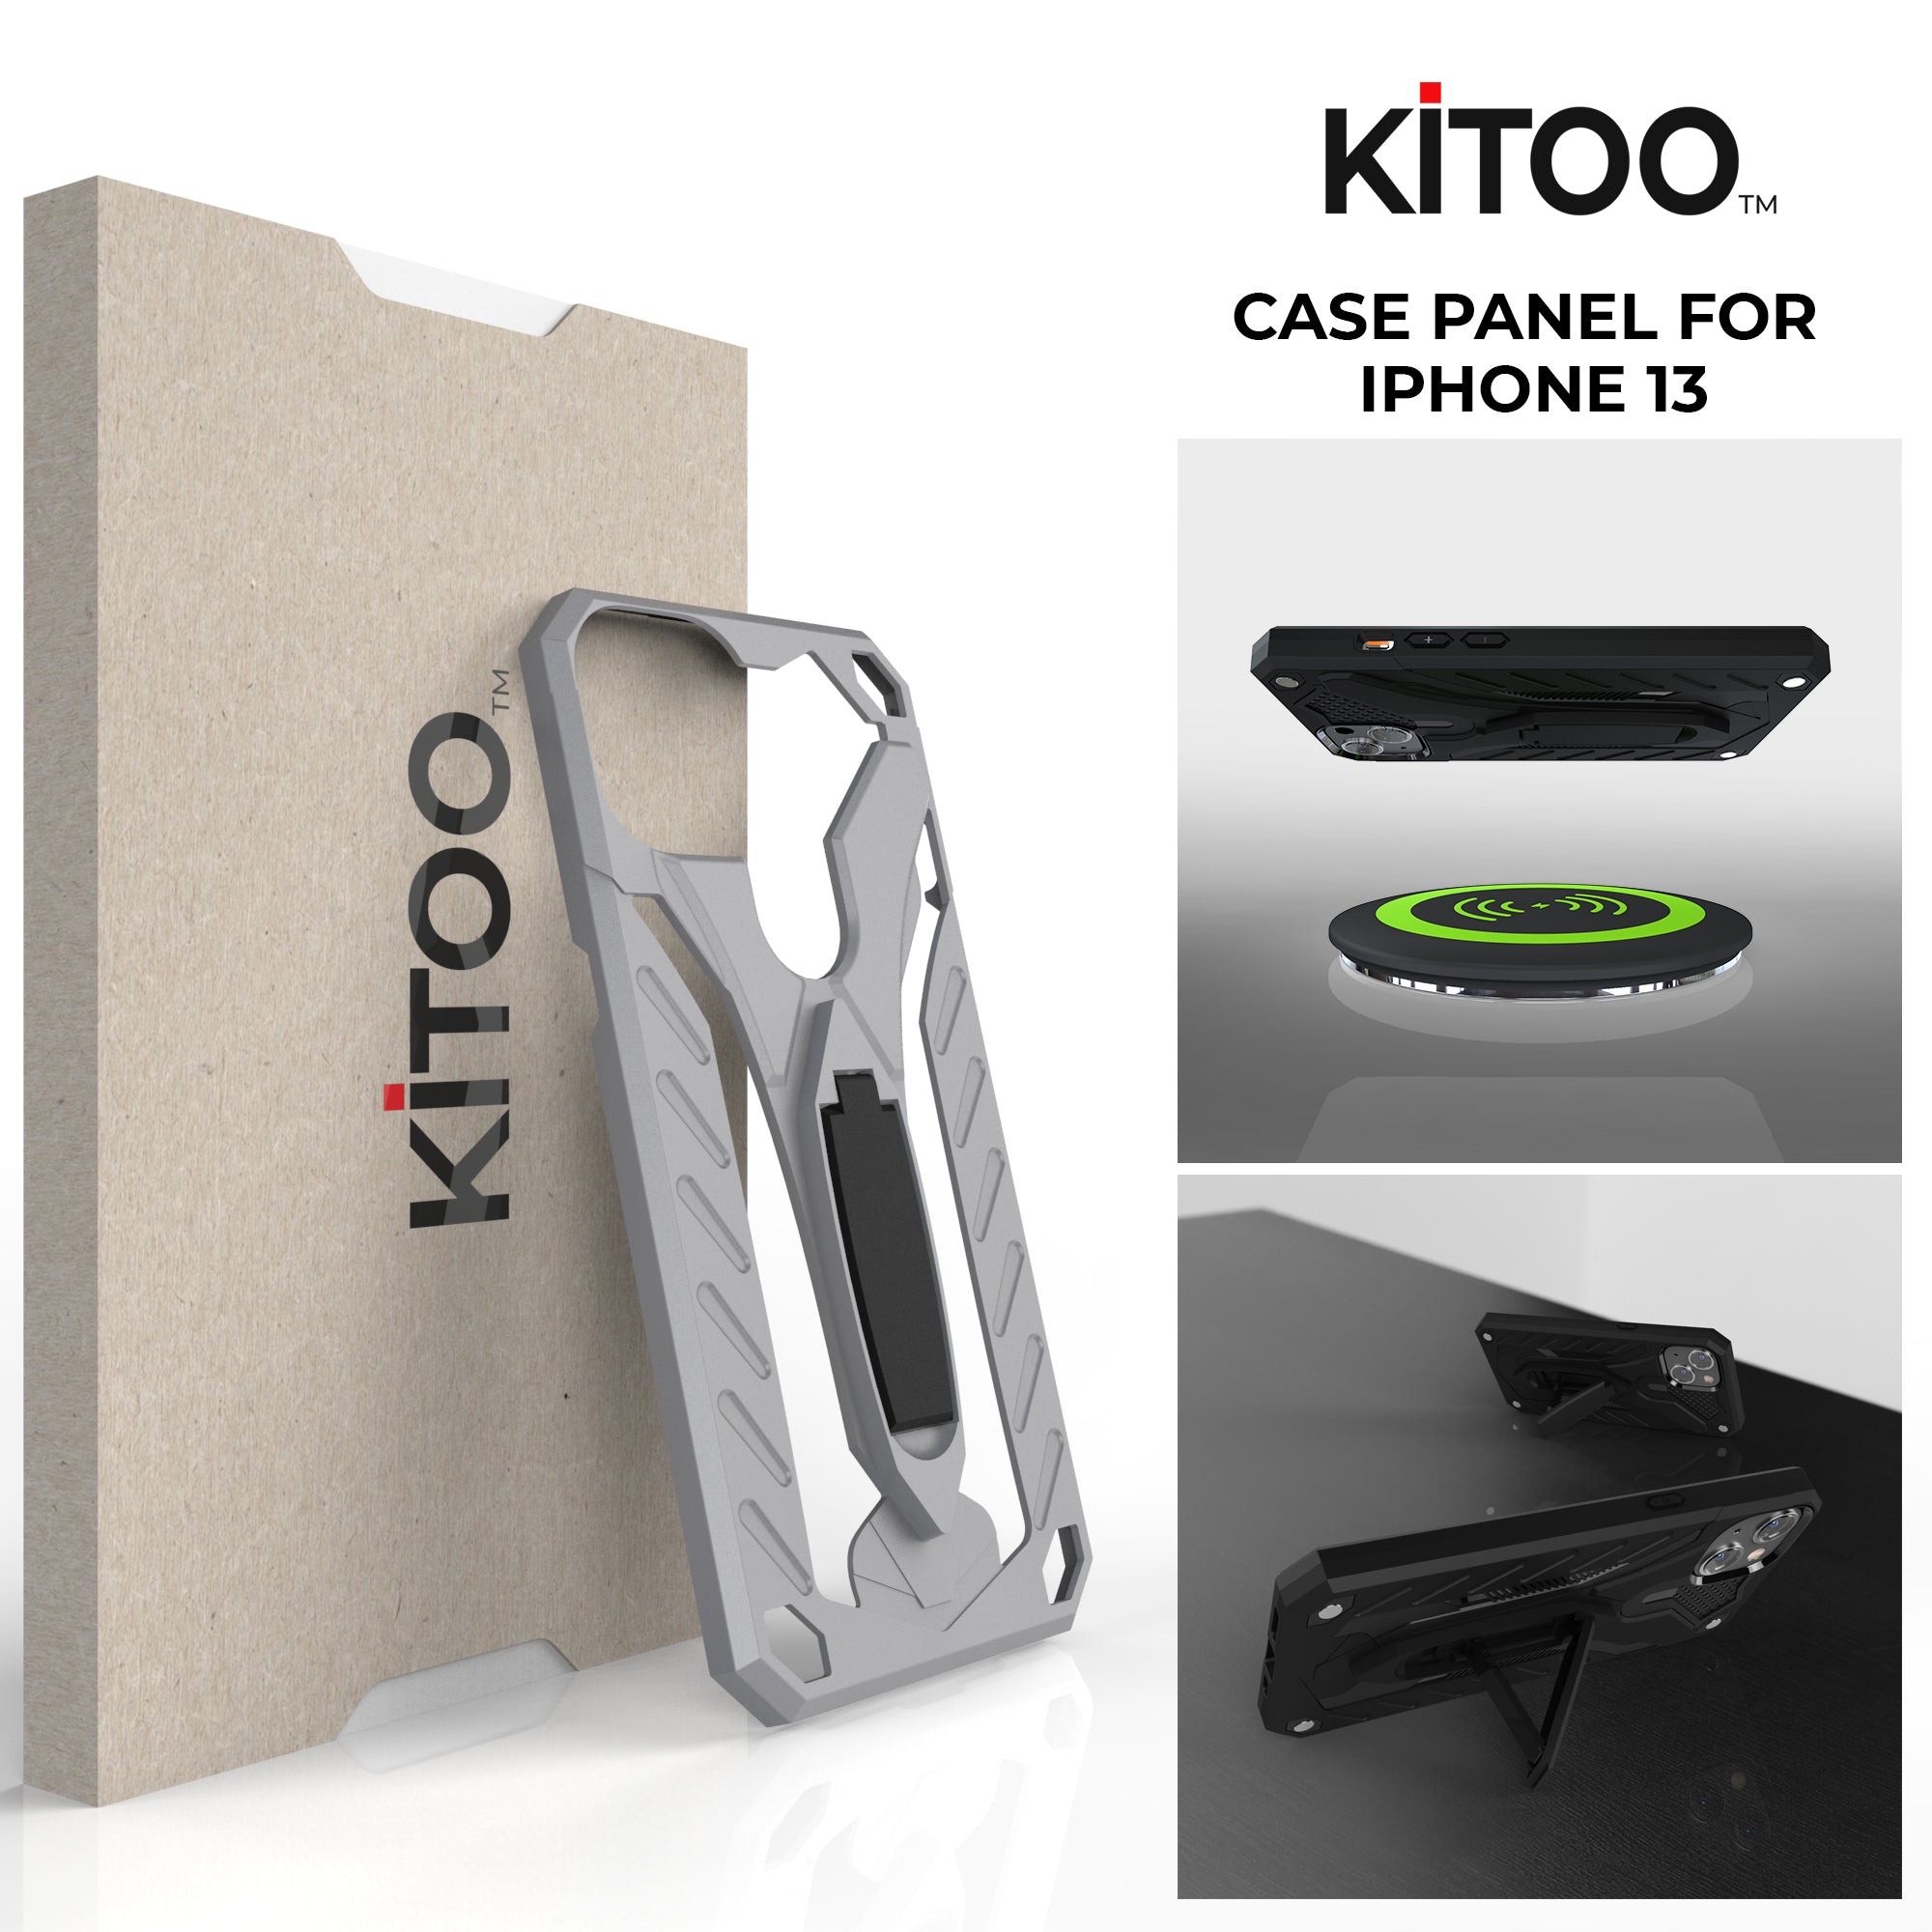 Kitoo Kickstand Panel Designed for iPhone 13 case (Spare Part only) - Silvery